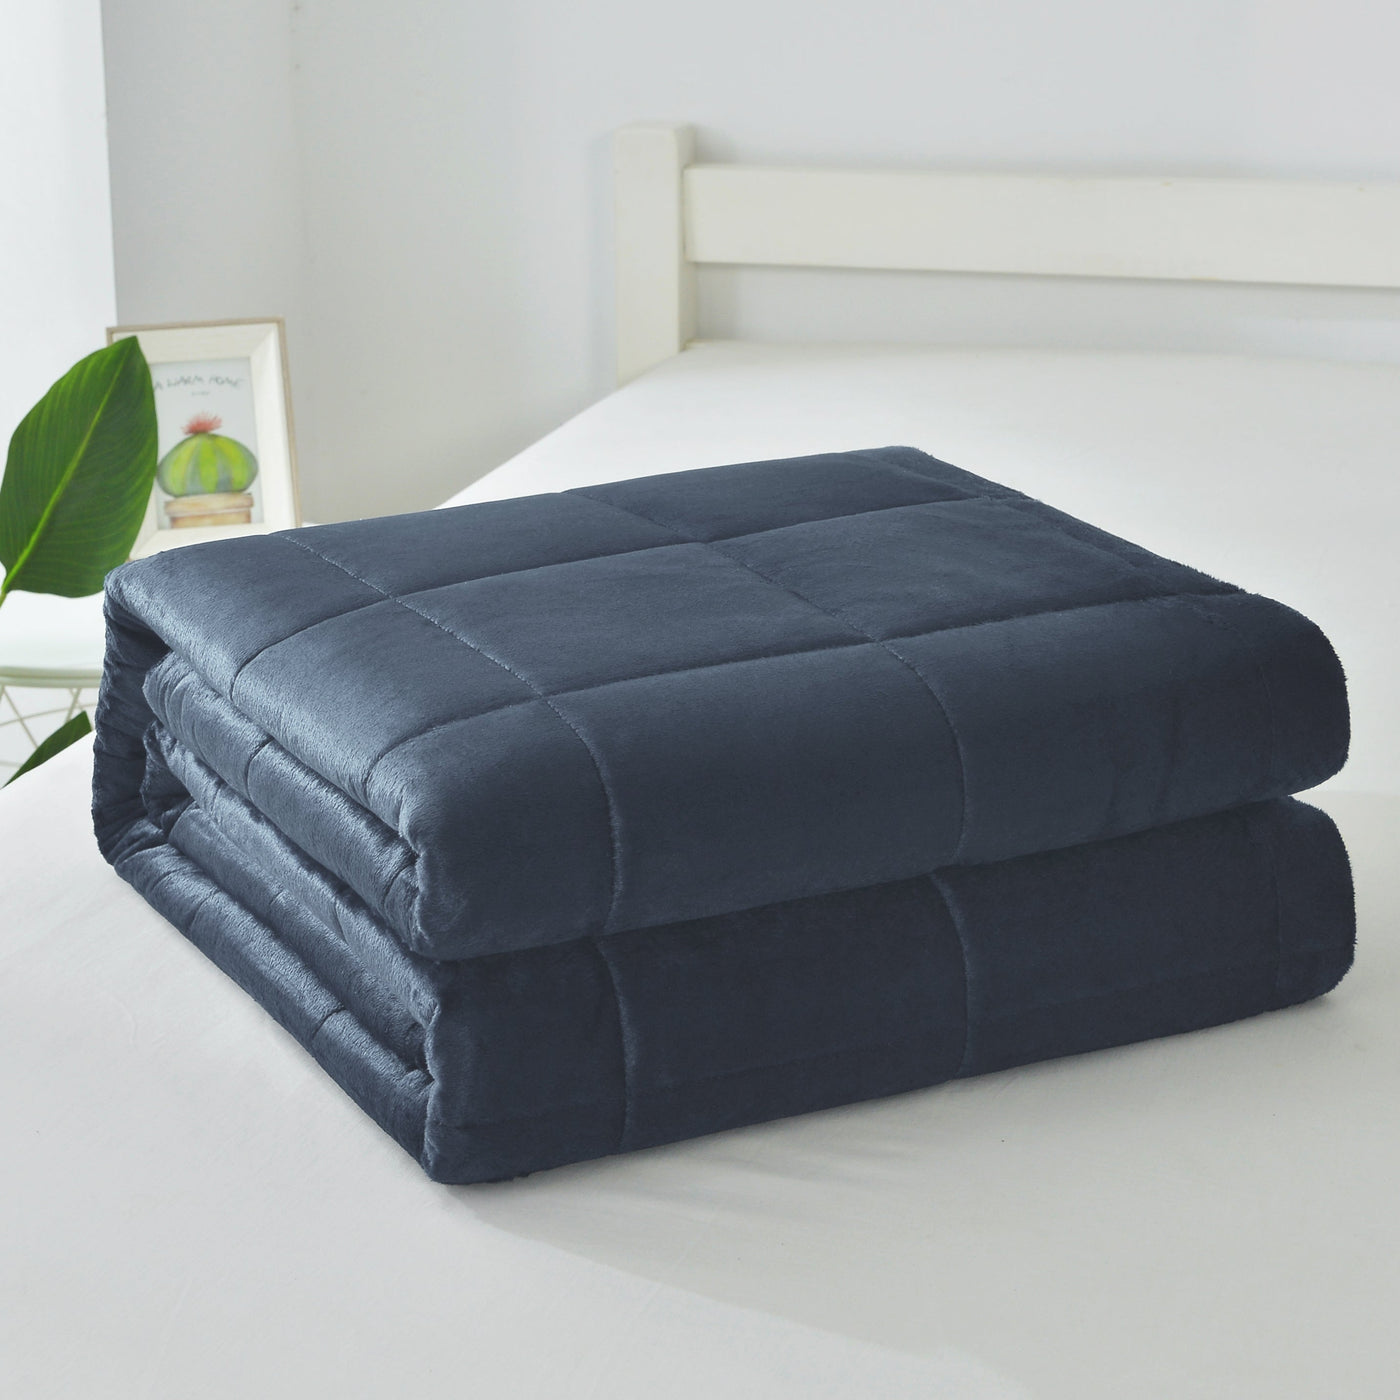 Solid Stitched Oversized Weighted Blanket Micro Mink Microfiber Throw Comfort - Jenin-Home-Furnishing.CURTAINS